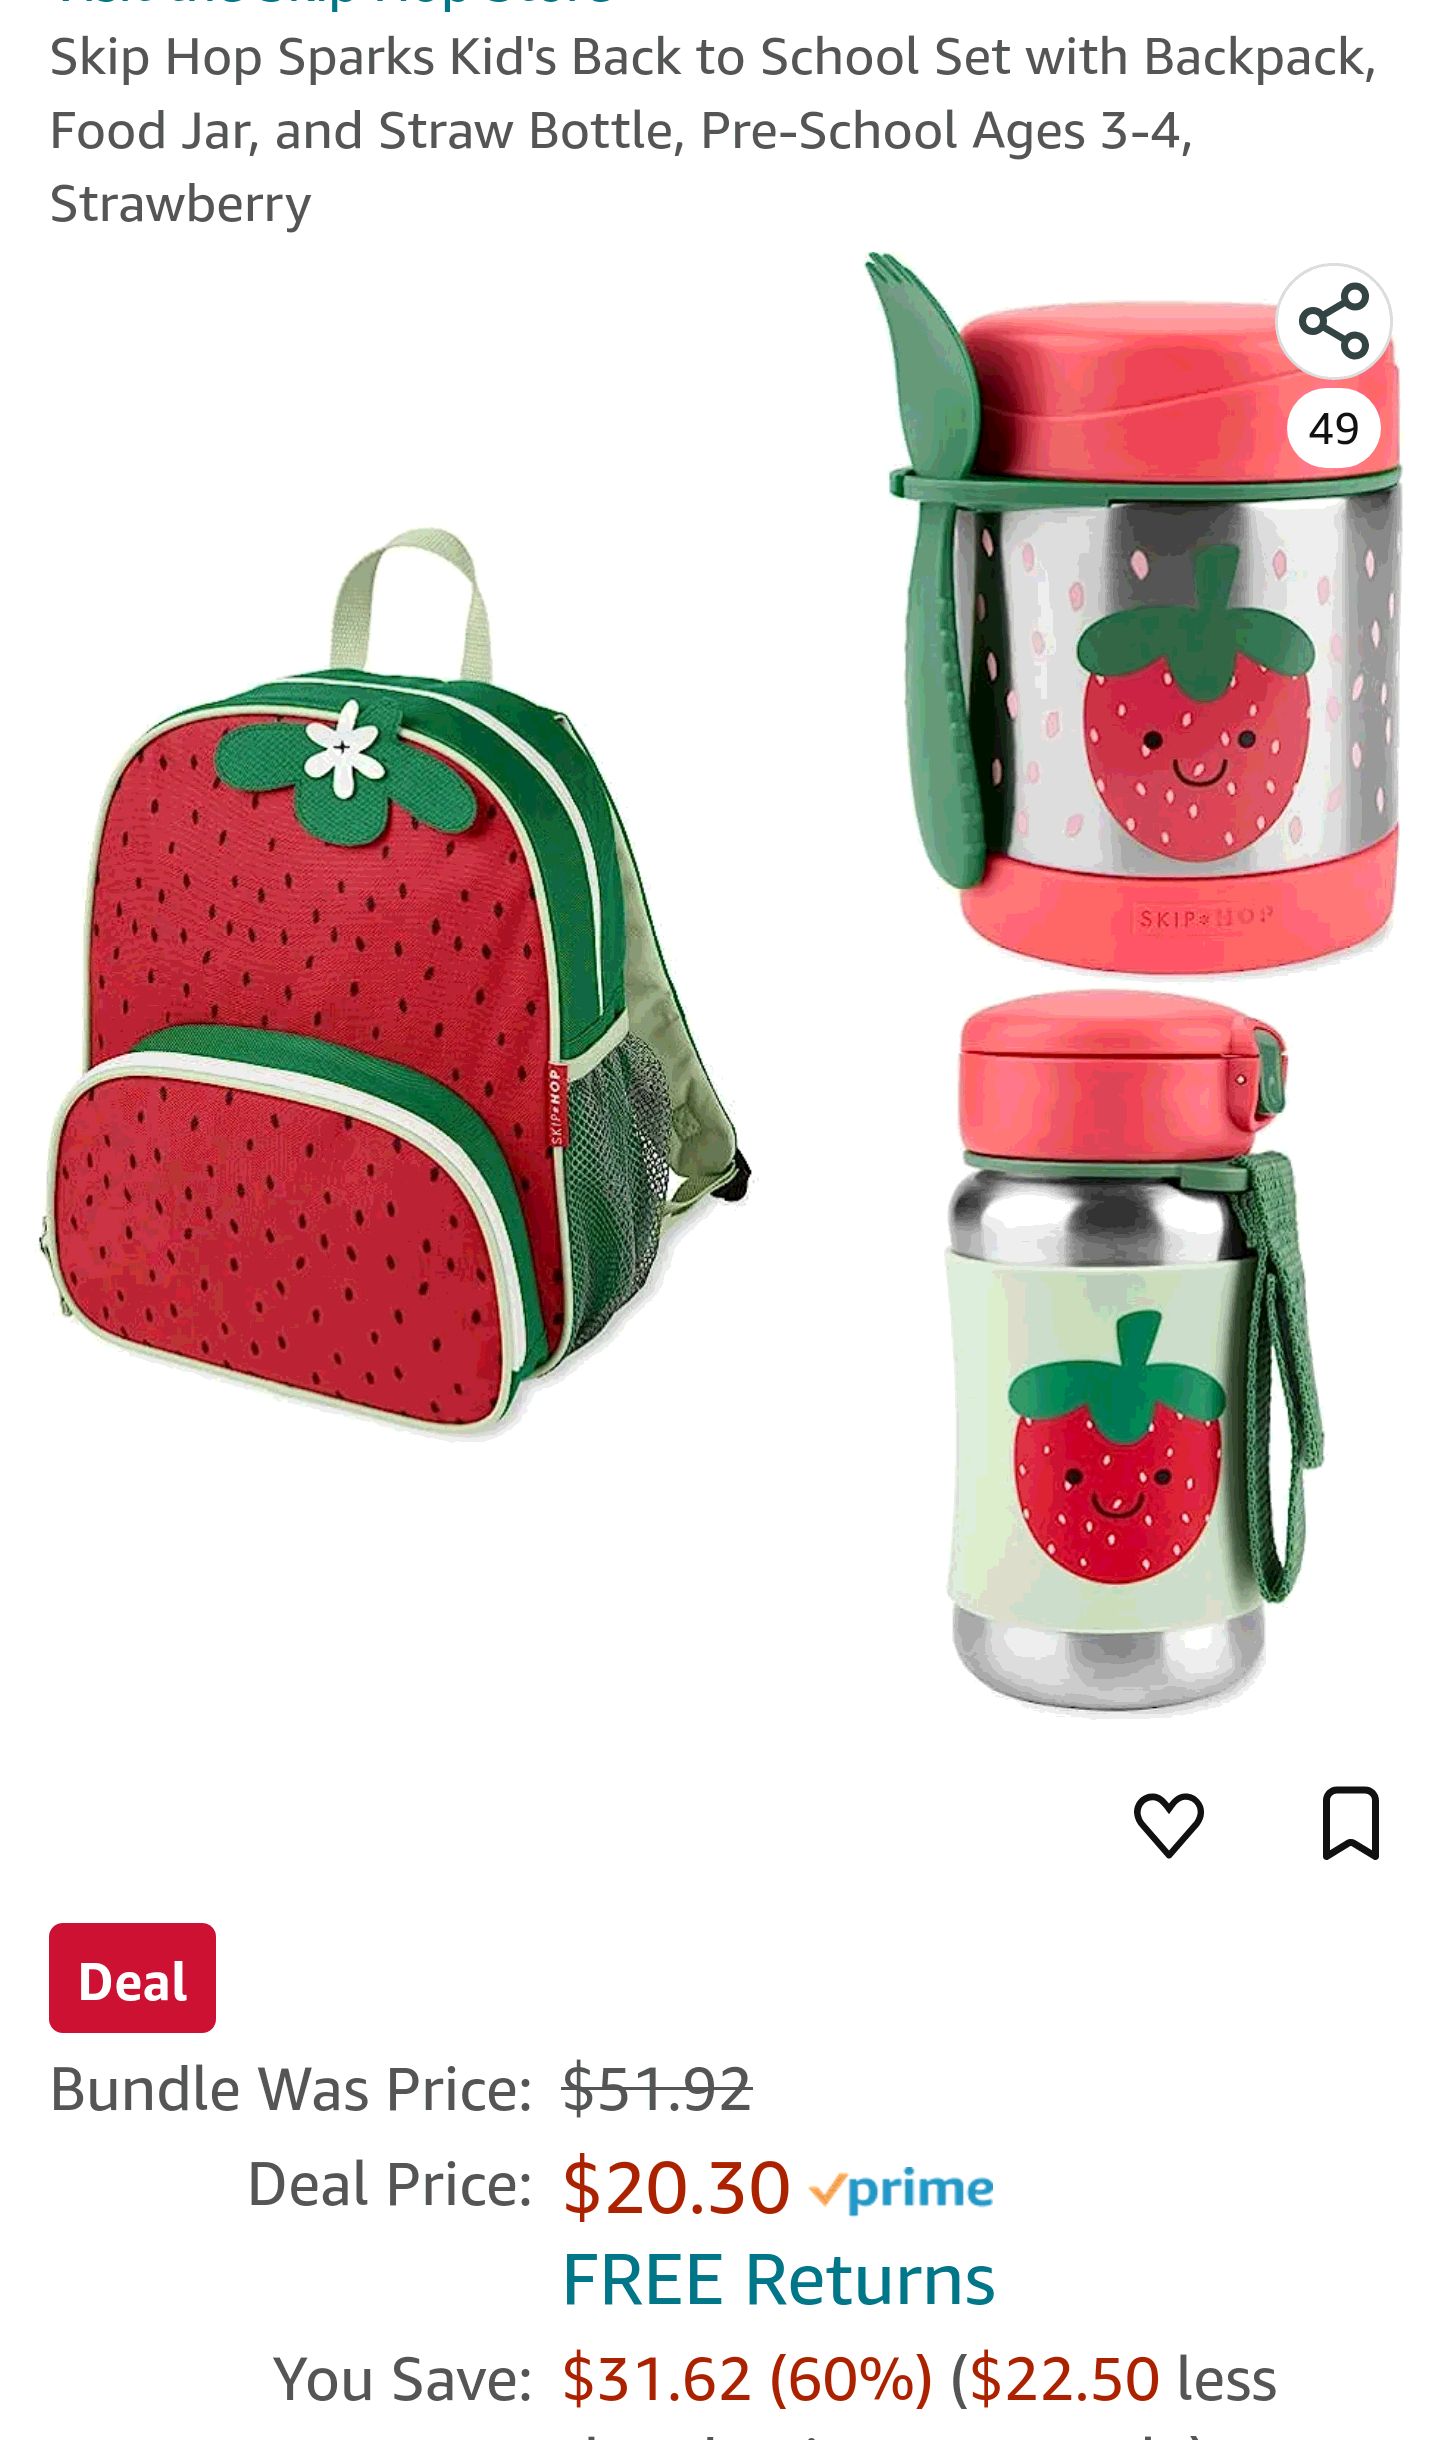 Skip Hop Sparks Kid's Back to School Set with Backpack, Food Jar, and Straw Bottle, Pre-School Ages 3-4, Strawberry : Baby